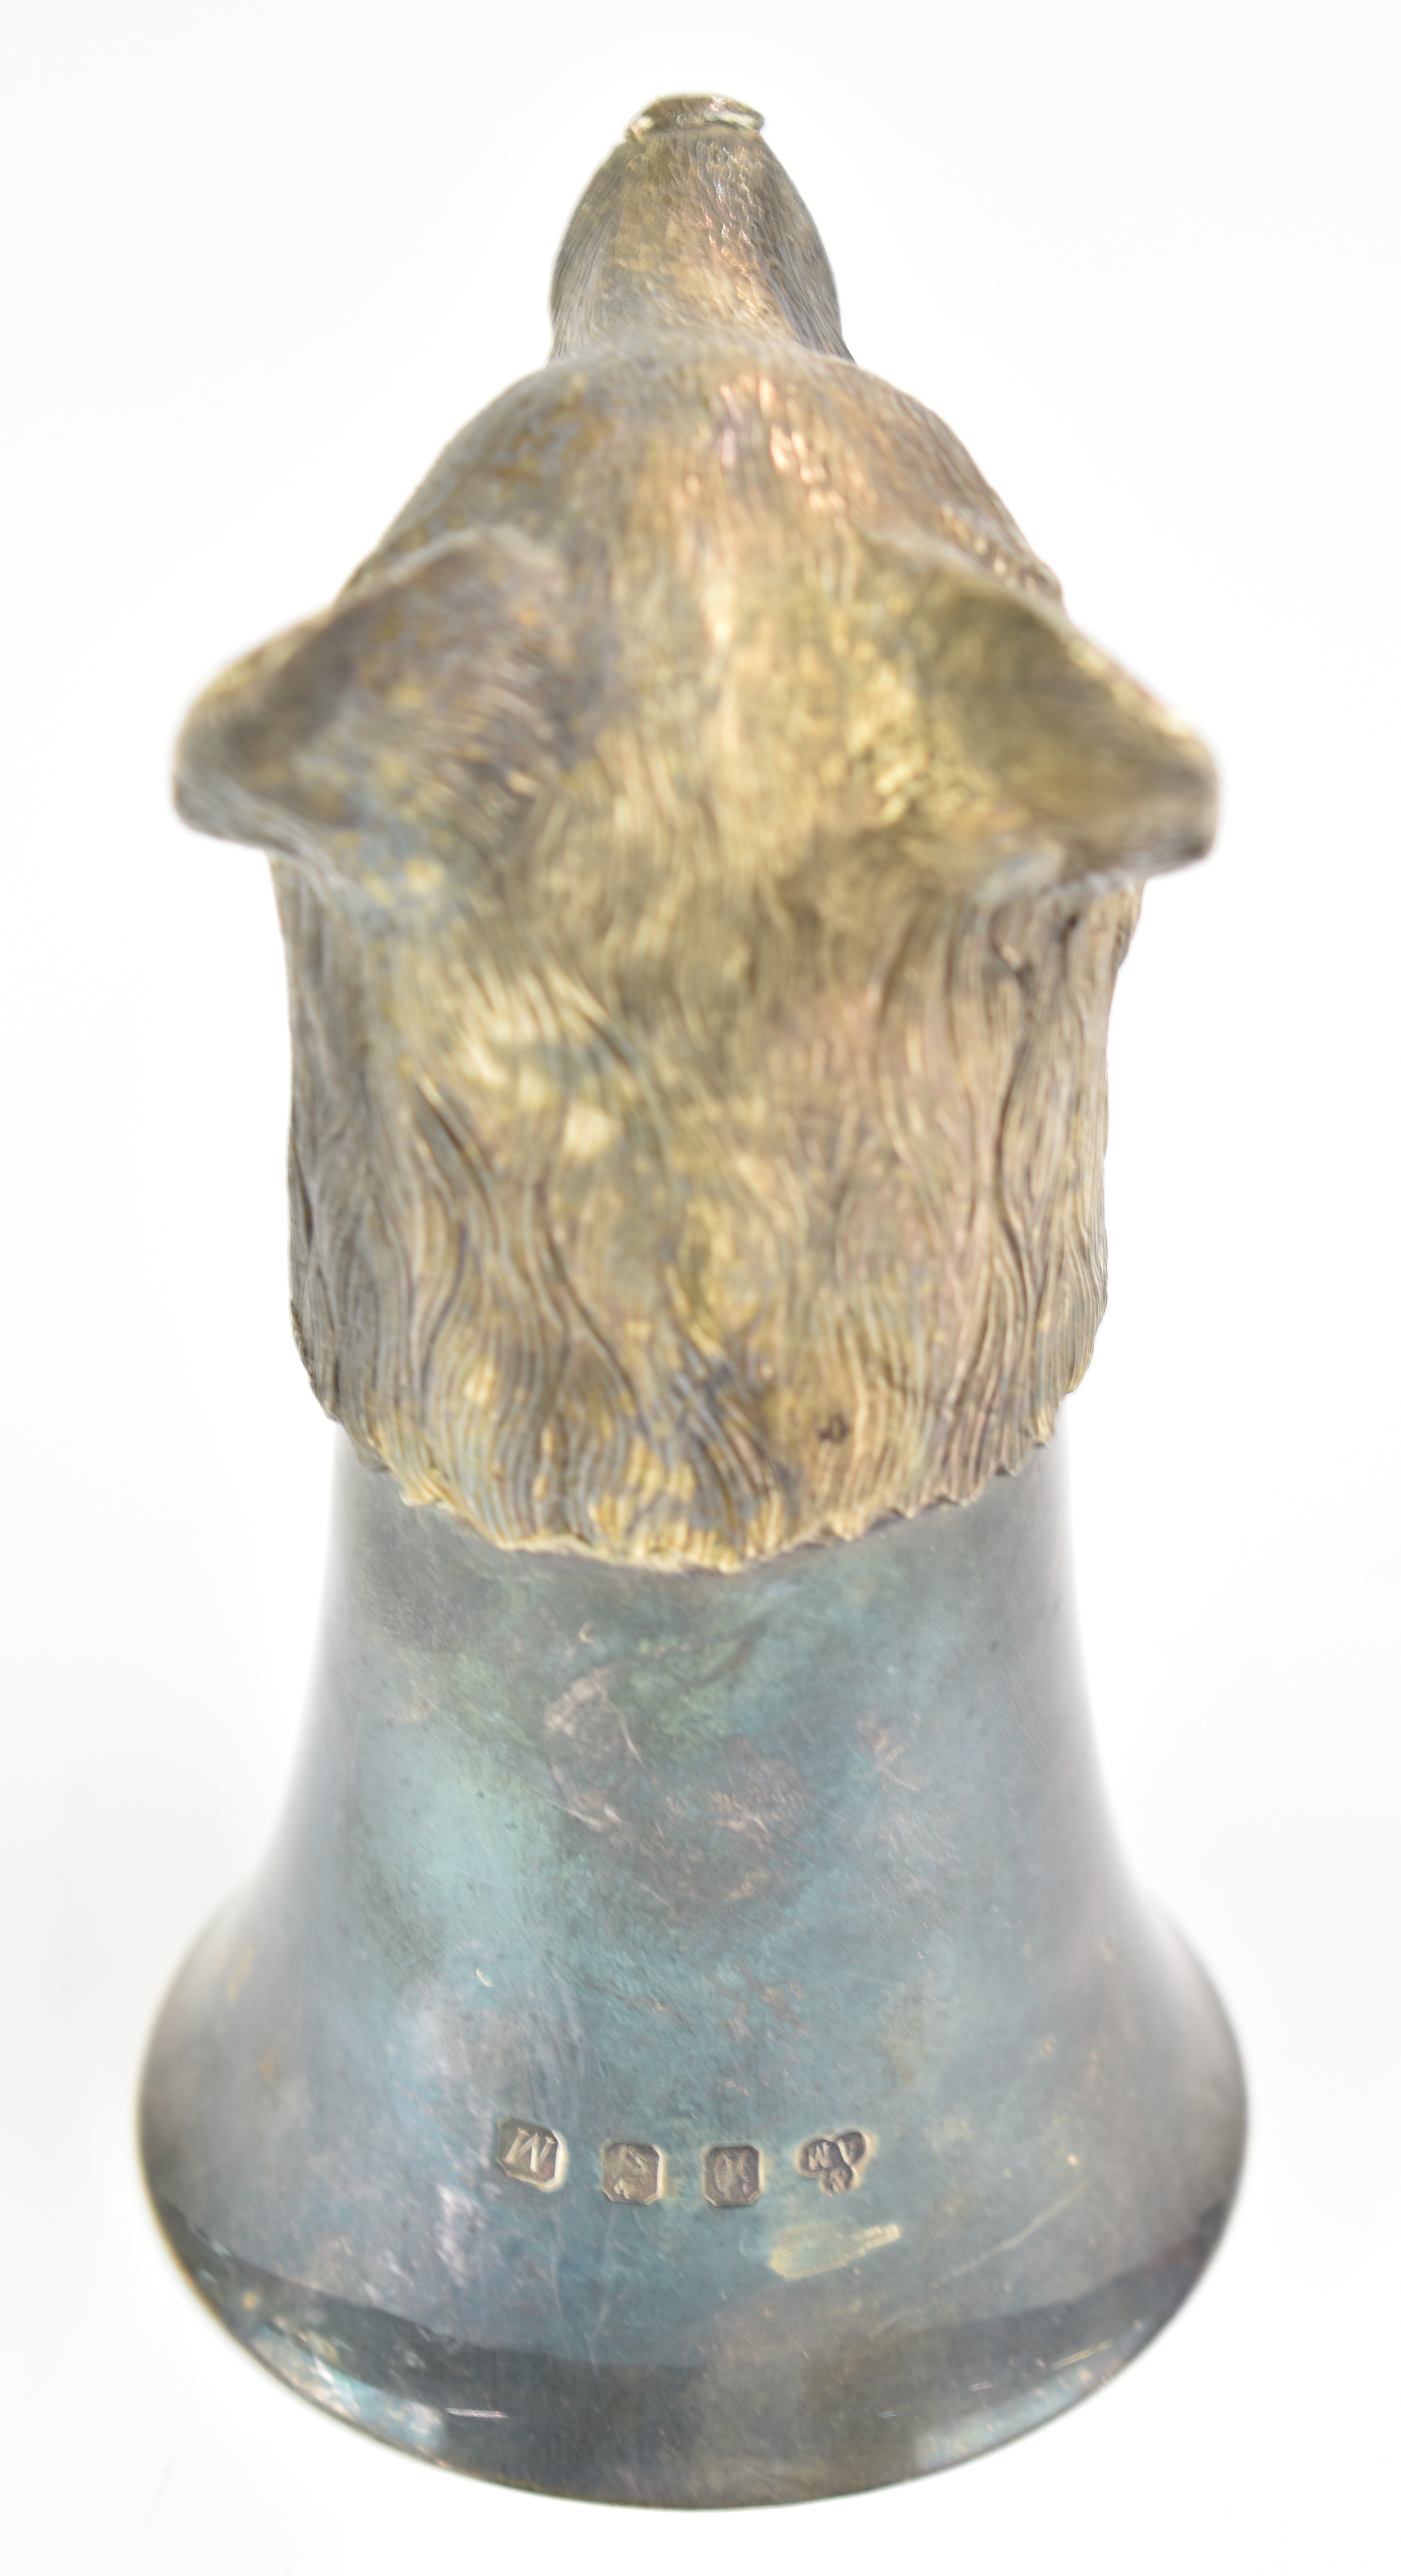 Irish hallmarked silver novelty stirrup cup formed as a fox's head, Dublin 1998, maker Alwright & - Image 4 of 5